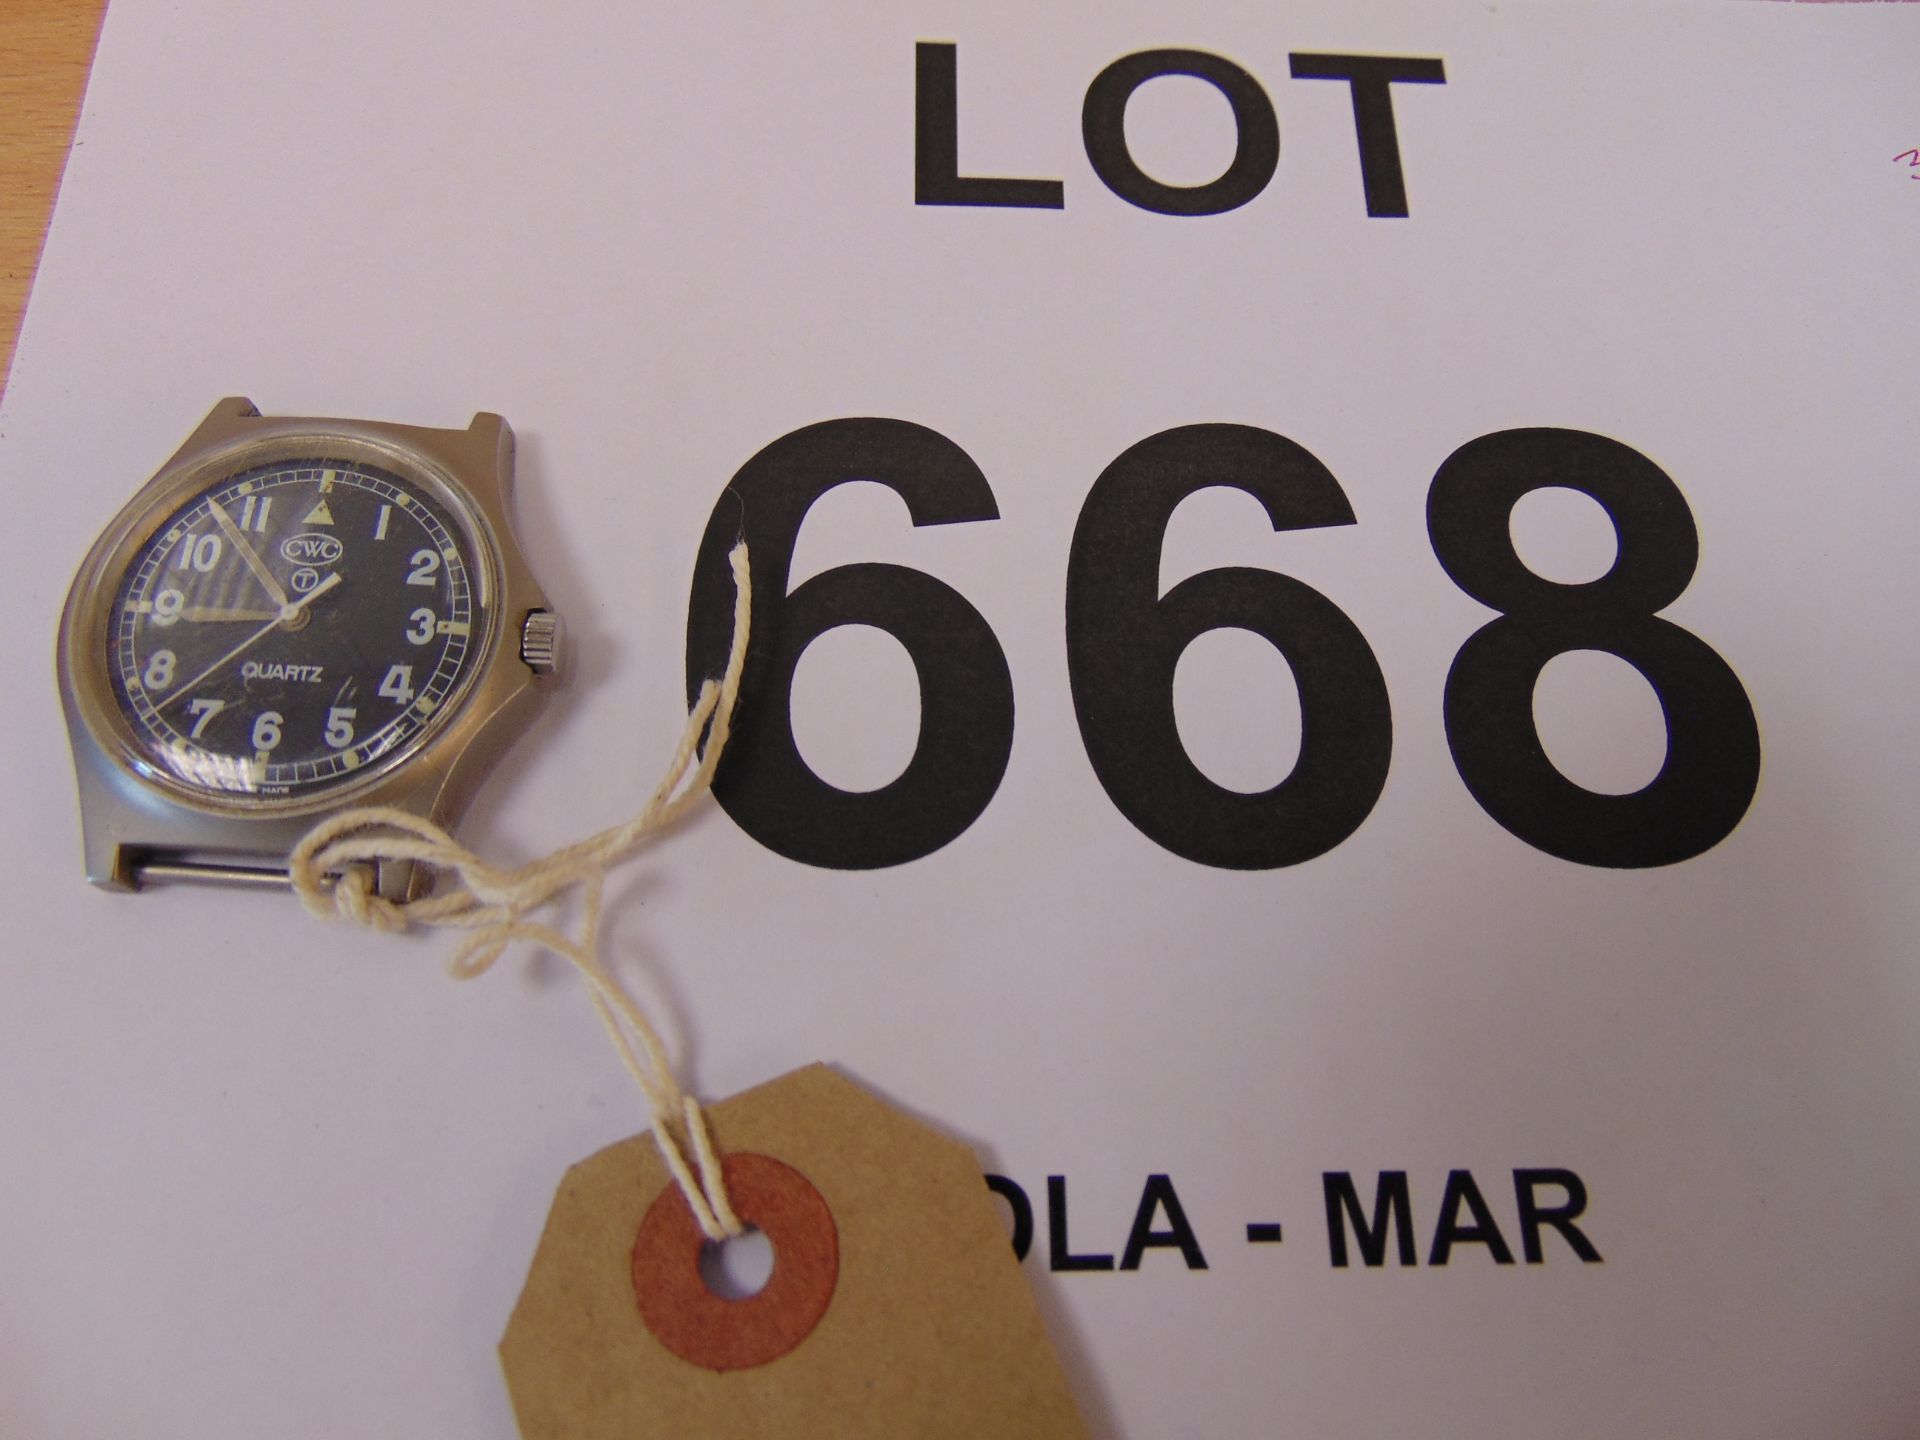 CWC 0552 Royal Navy/Marines Service Watch Nato Marks Date 1990 * GULF WAR * - Image 3 of 3